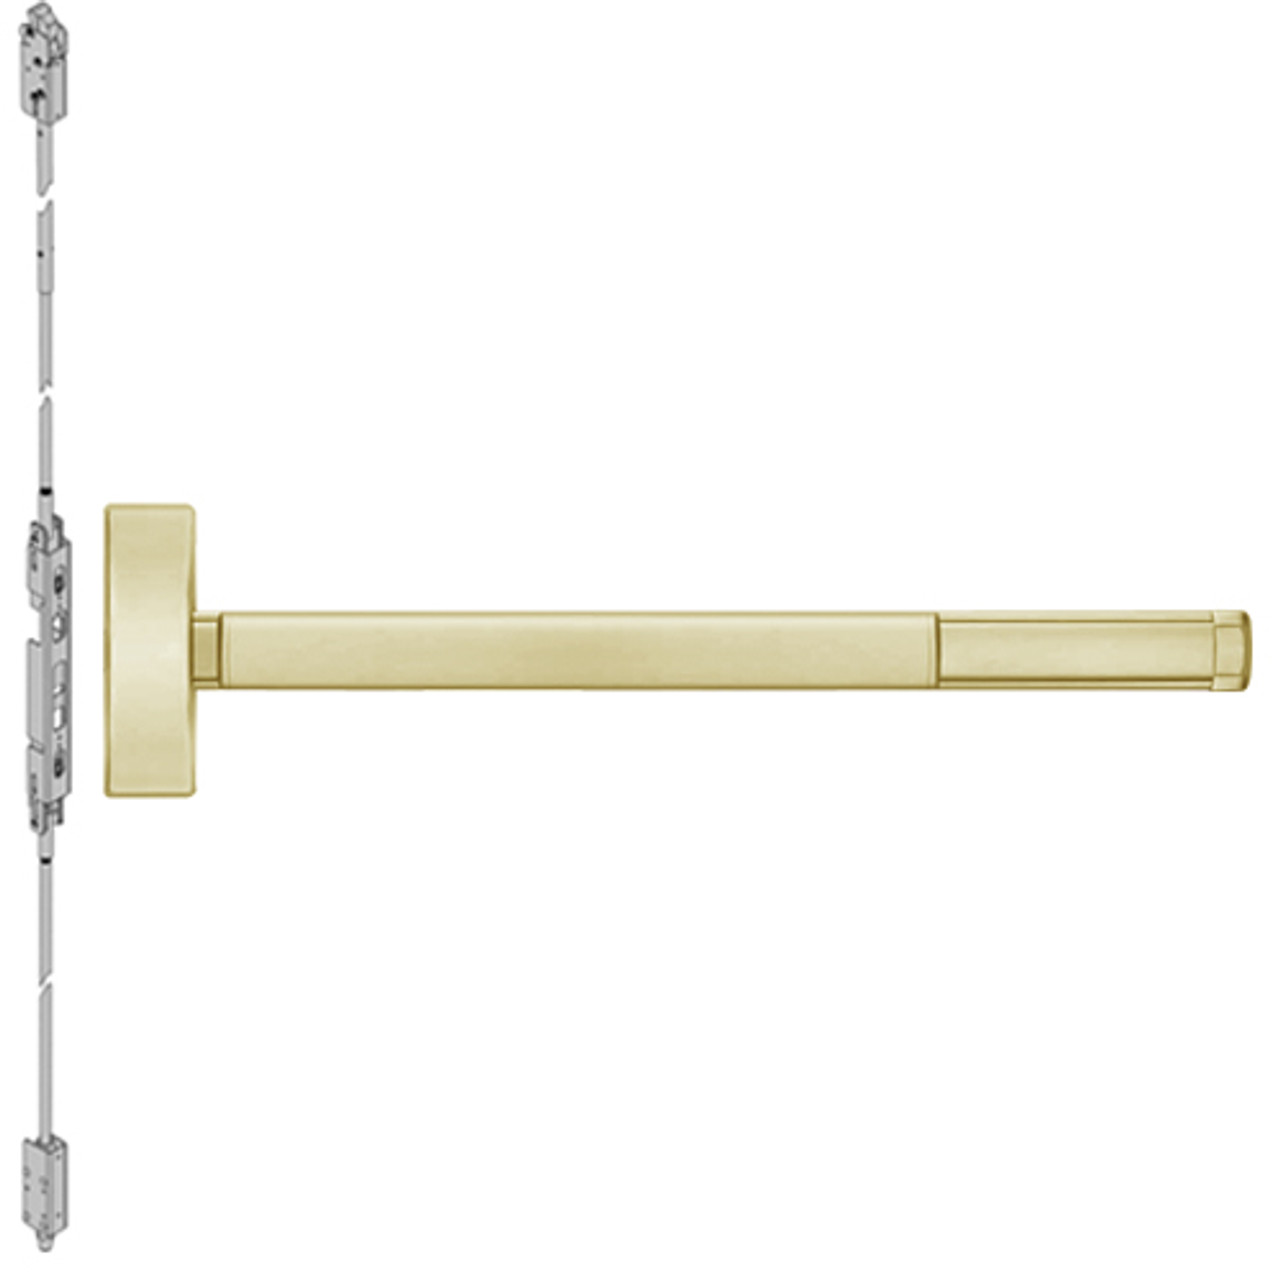 TS2805LBR-606-36 PHI 2800 Series Concealed Vertical Rod Exit Device with Touchbar Monitoring Switch Prepped for Key Controls Thumb Piece in Satin Brass Finish